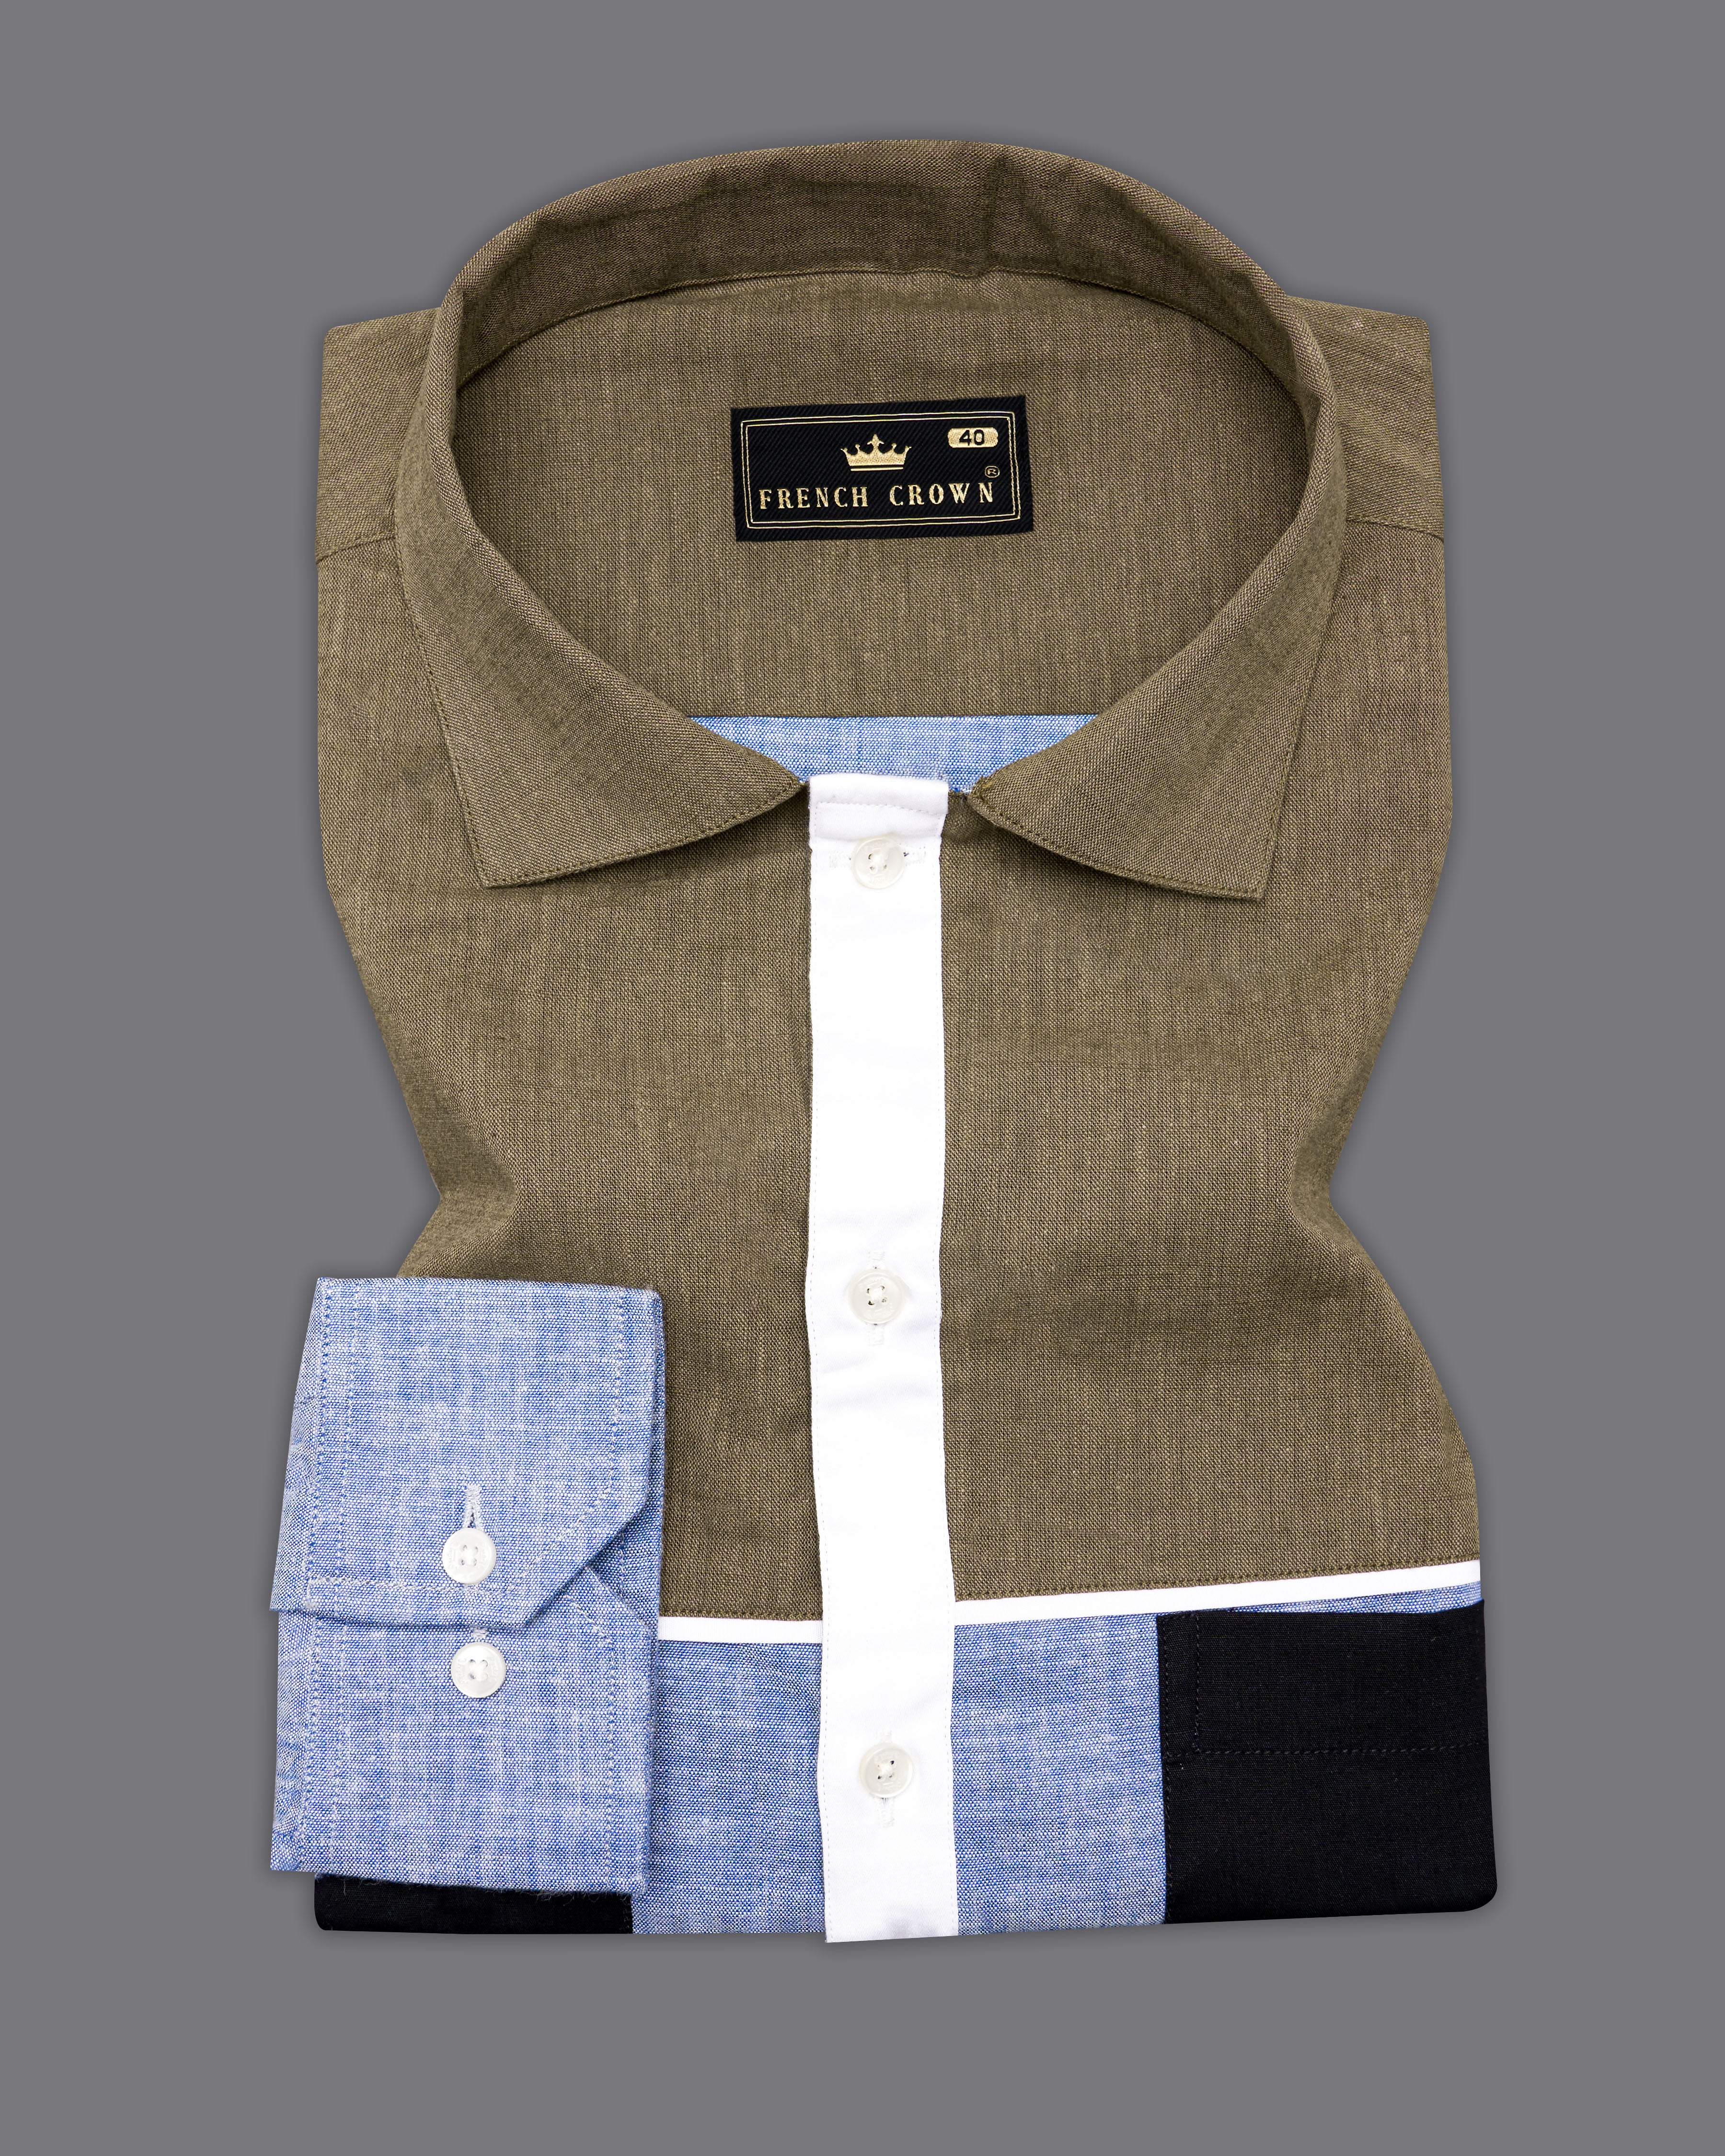 Carolina Blue with Brown and Black Luxurious Linen Designer Shirt 9625-CA-P231-38,9625-CA-P231-H-38,9625-CA-P231-39,9625-CA-P231-H-39,9625-CA-P231-40,9625-CA-P231-H-40,9625-CA-P231-42,9625-CA-P231-H-42,9625-CA-P231-44,9625-CA-P231-H-44,9625-CA-P231-46,9625-CA-P231-H-46,9625-CA-P231-48,9625-CA-P231-H-48,9625-CA-P231-50,9625-CA-P231-H-50,9625-CA-P231-52,9625-CA-P231-H-52